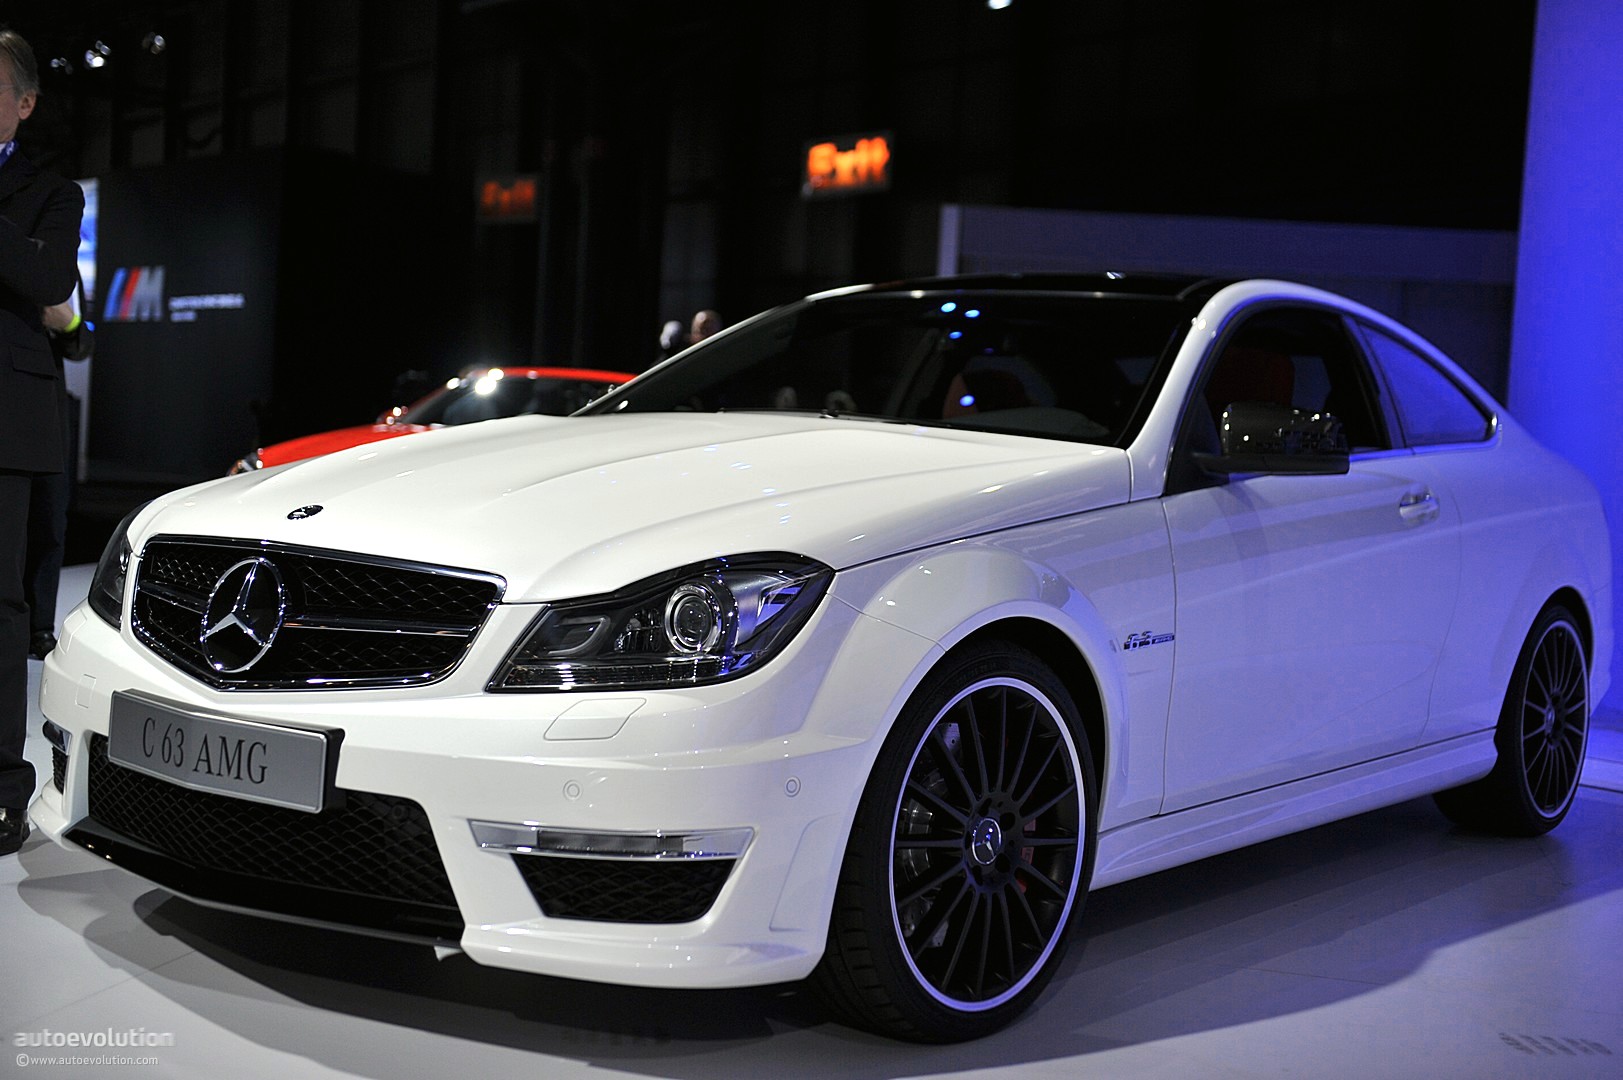 Amg mercedes c63 coupe #7